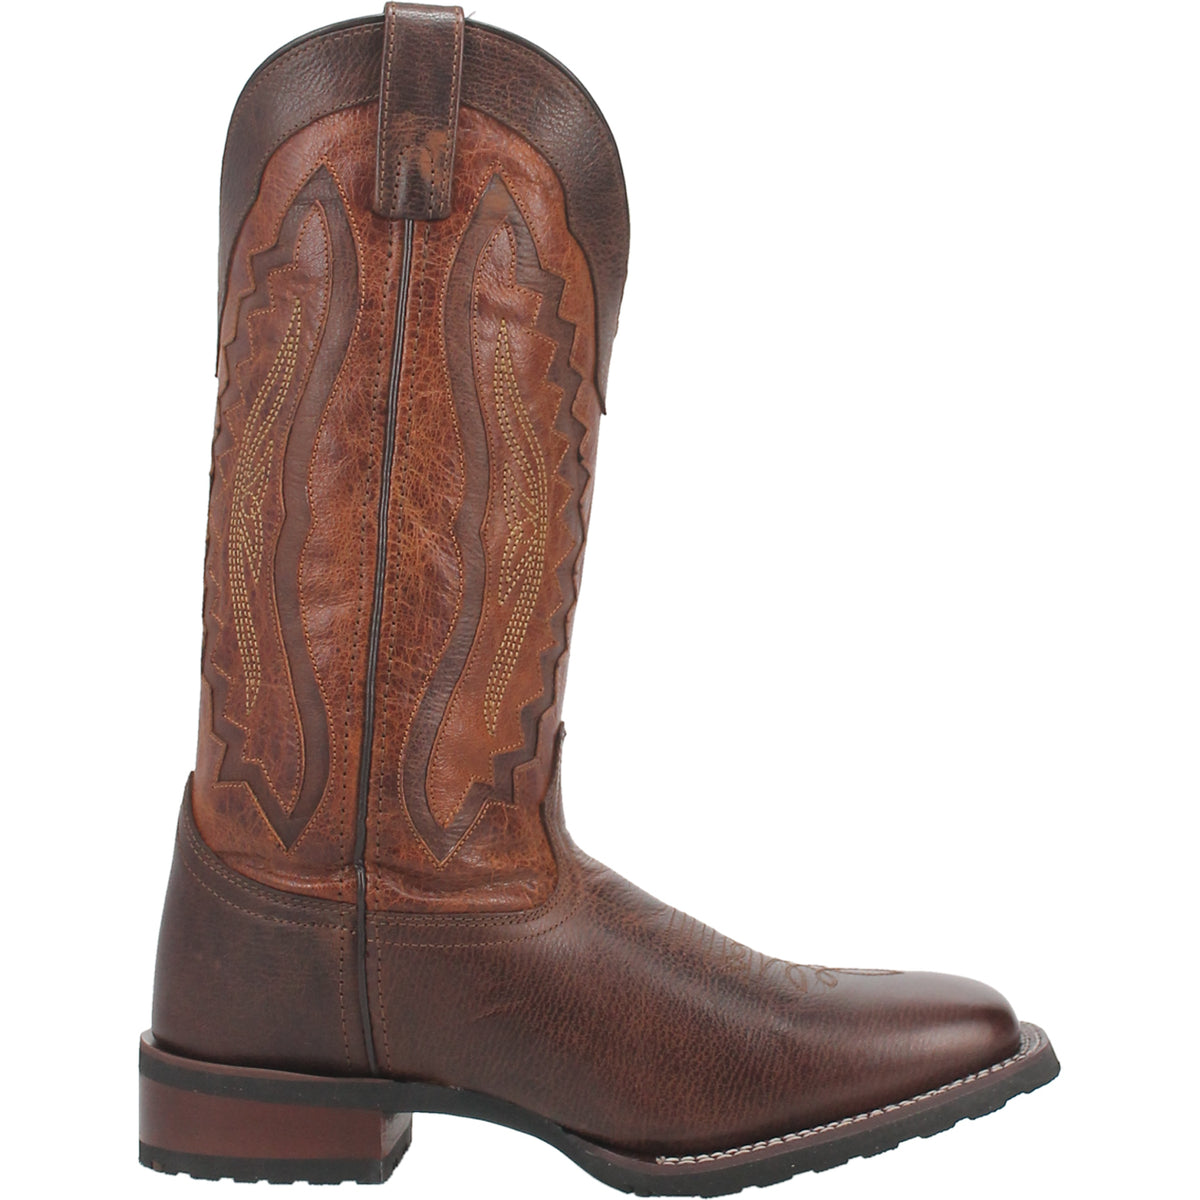 LUCAS LEATHER BOOT Cover